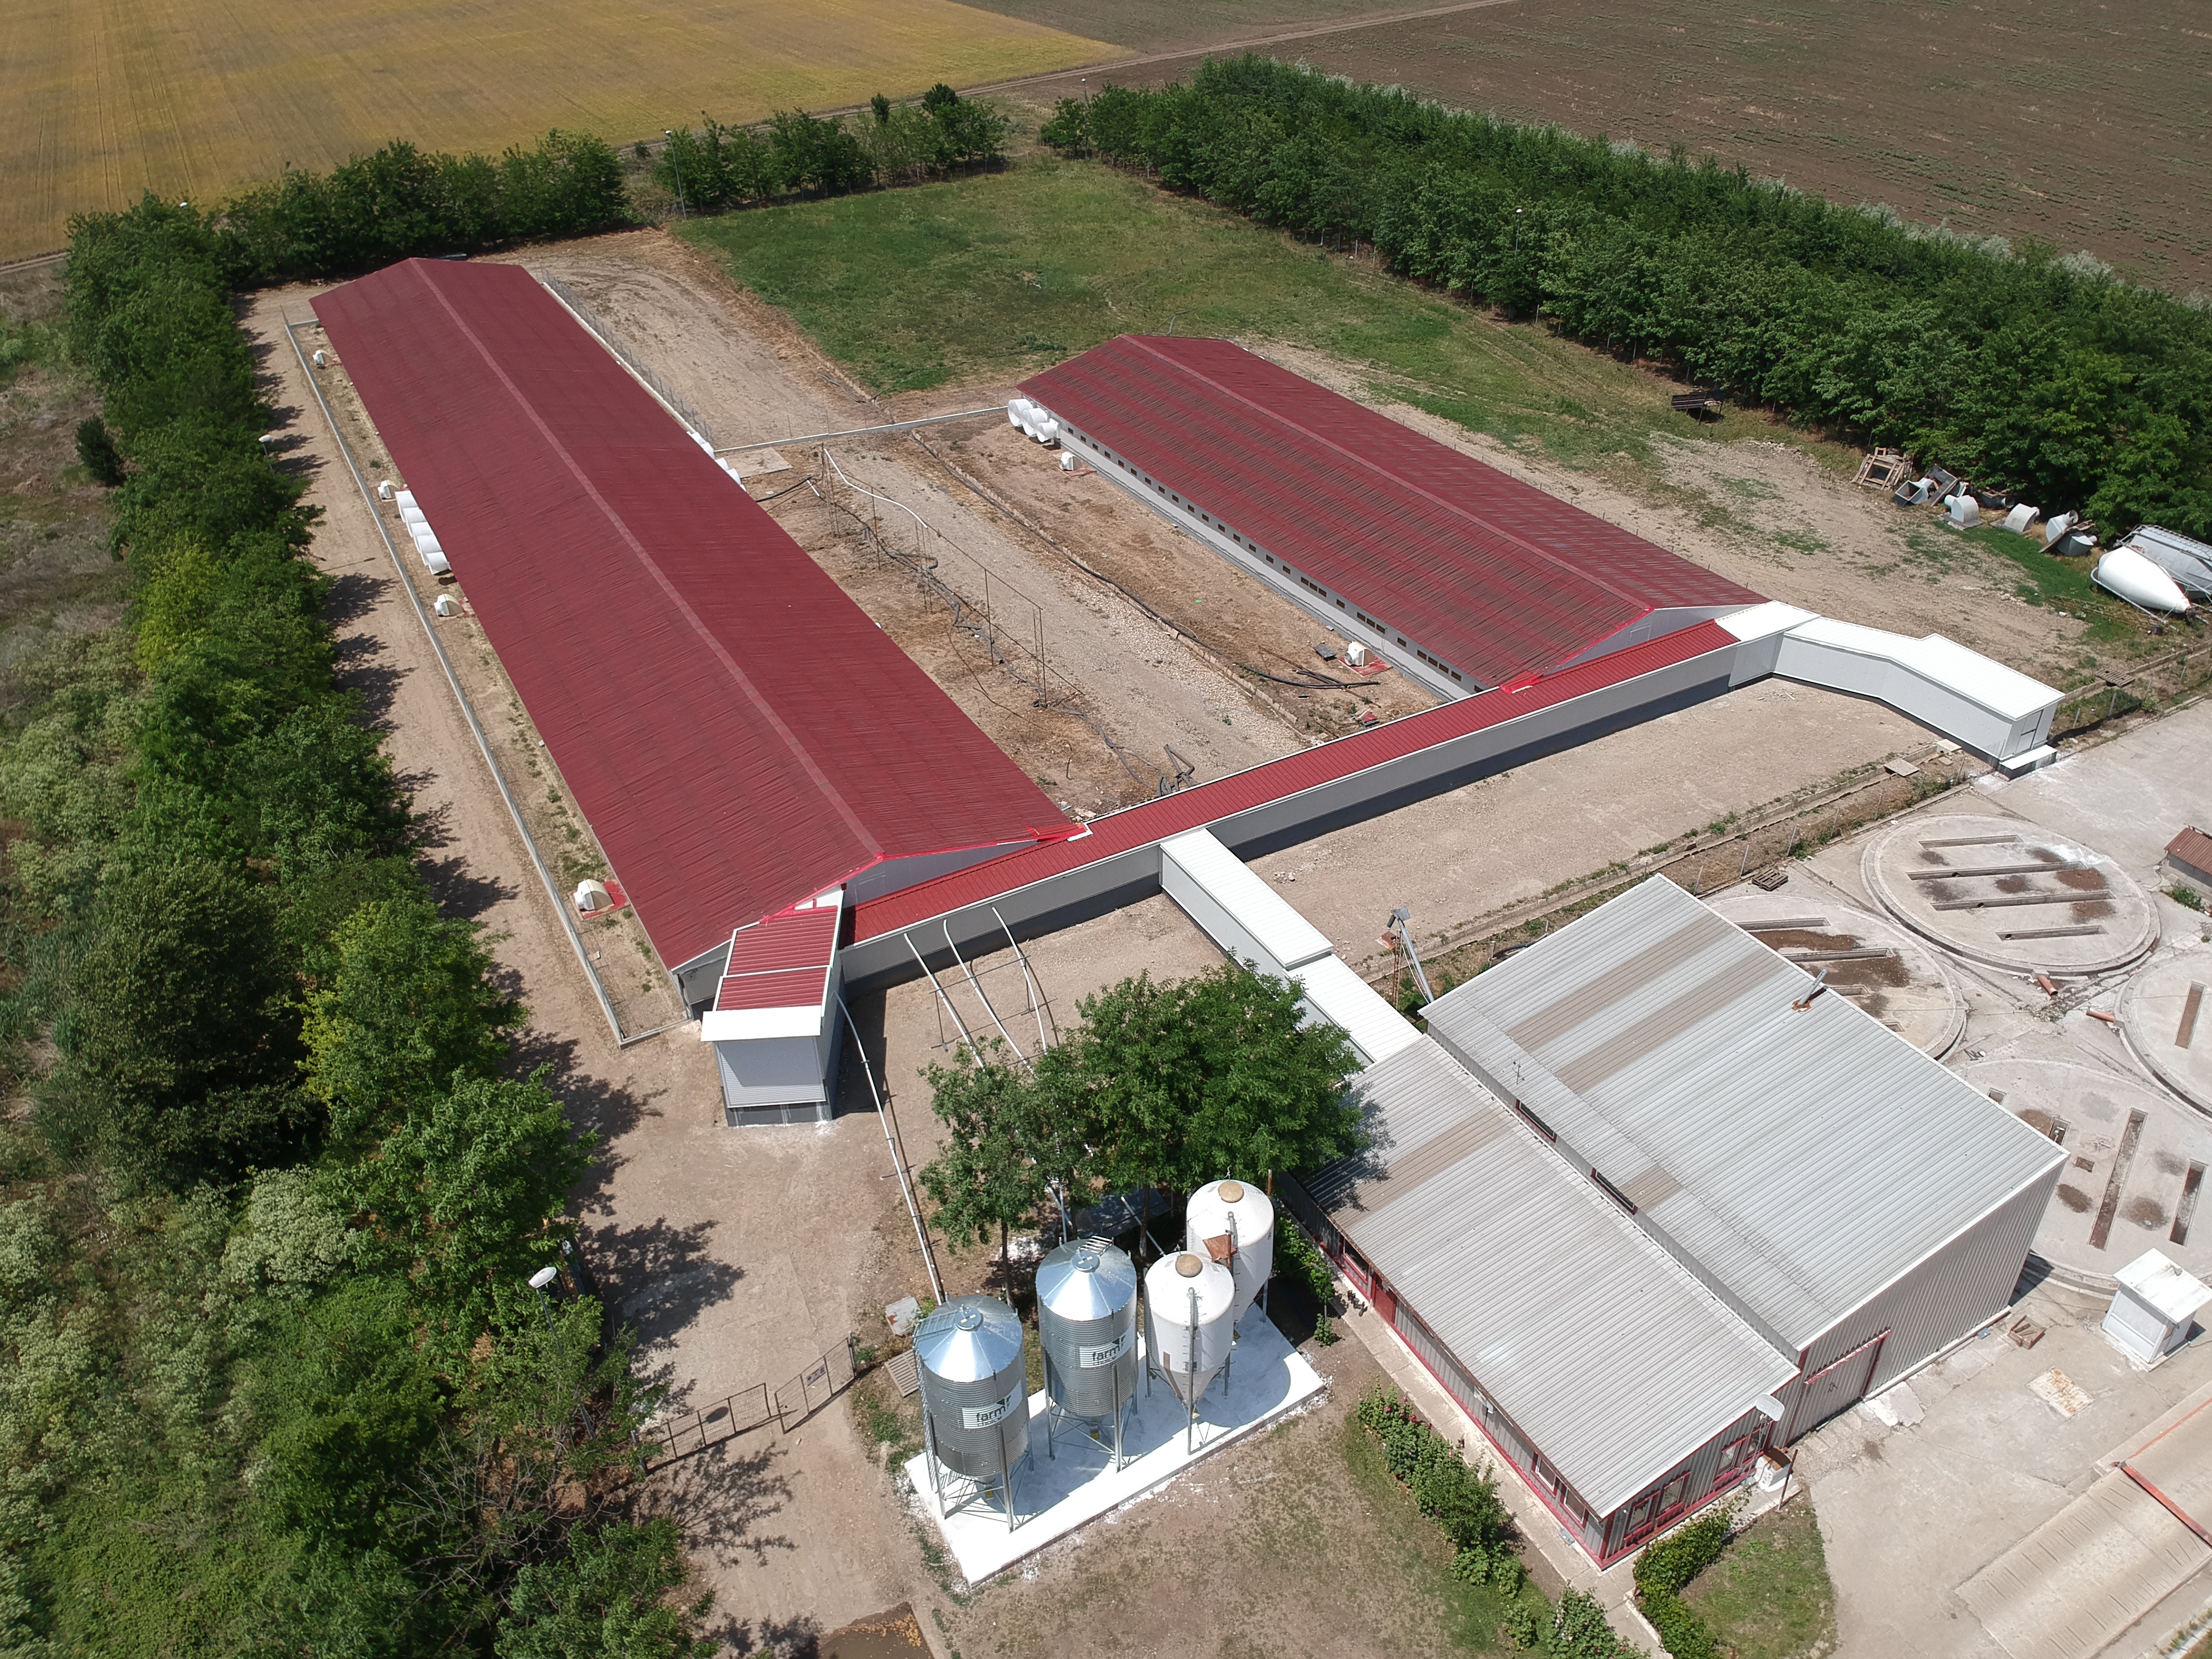 One of the largest pork producers in Romania, continues the expansion plan on the local market